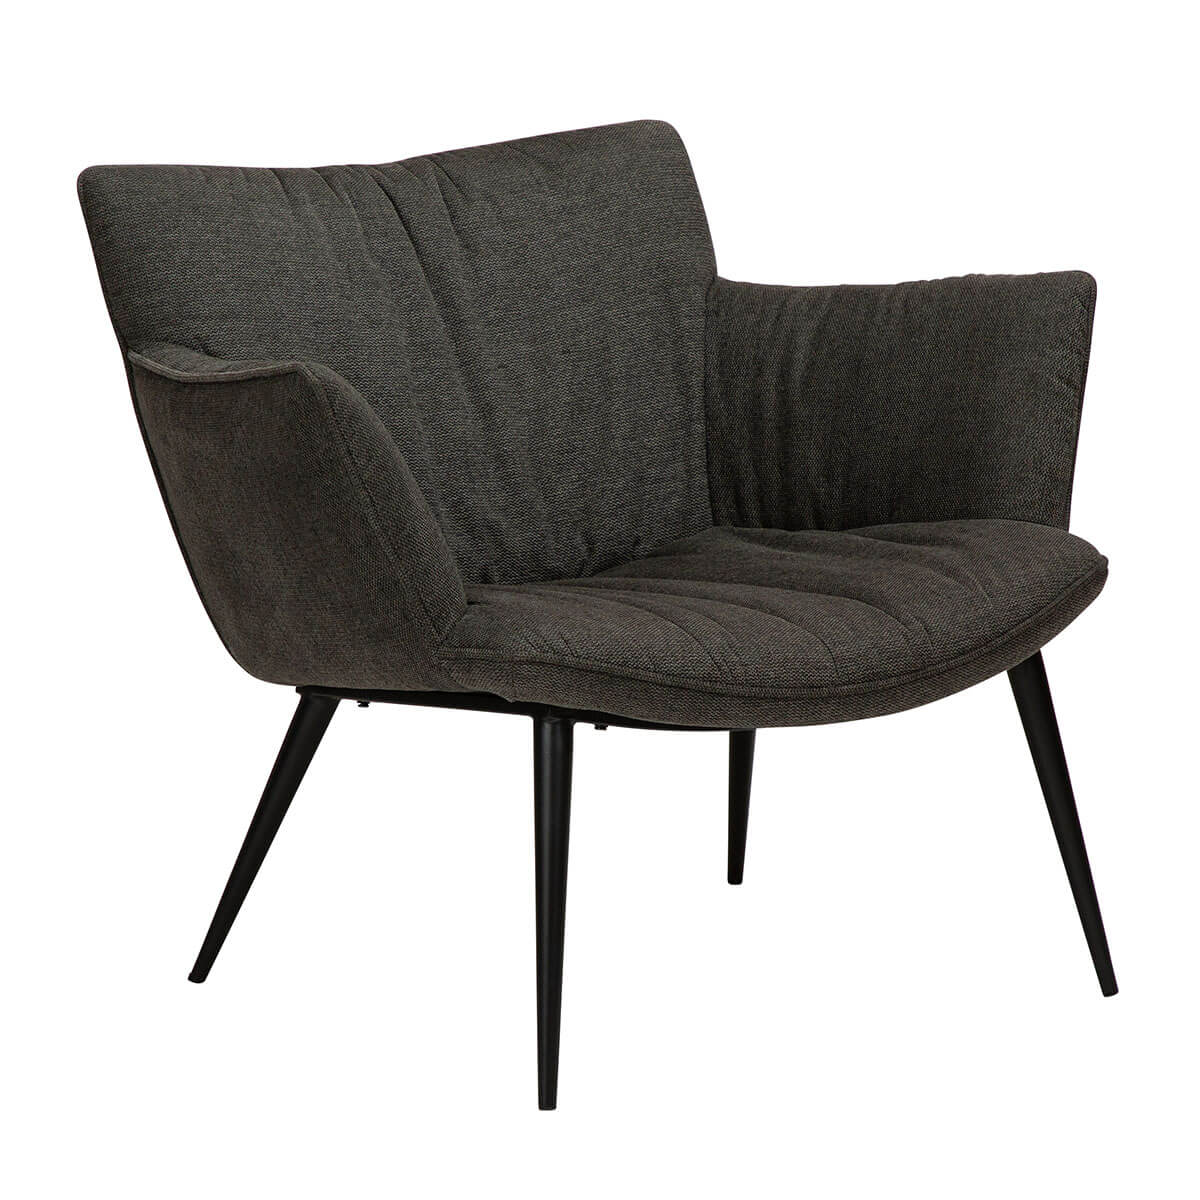 Dan-form - Fauteuil Join Stof -